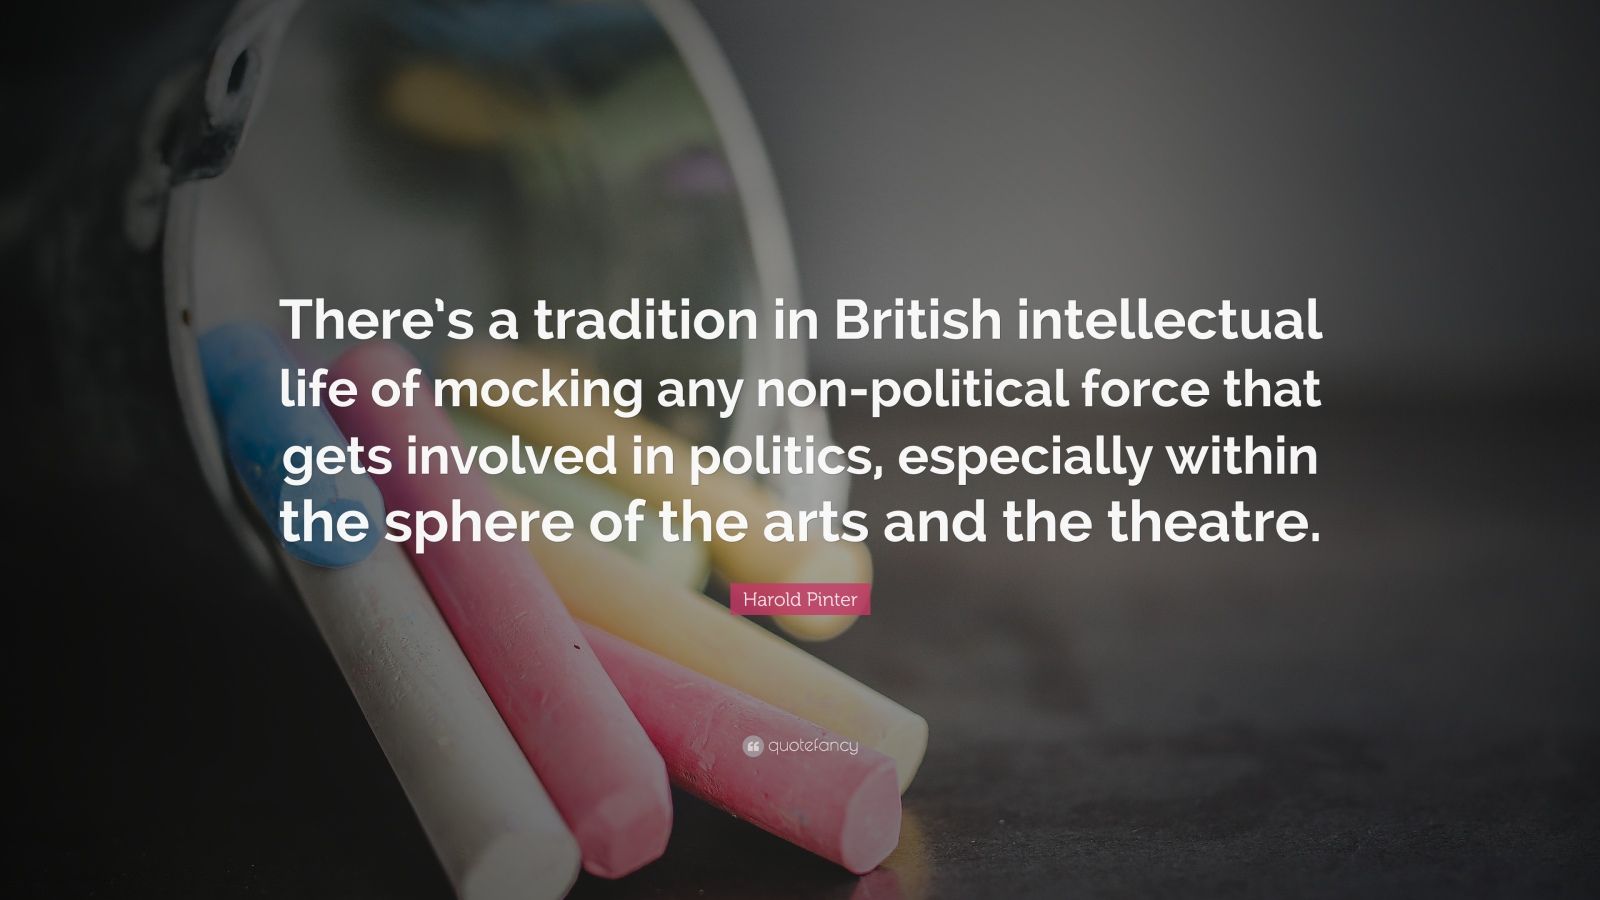 Harold Pinter Quote “There s a tradition in British intellectual life of mocking any non